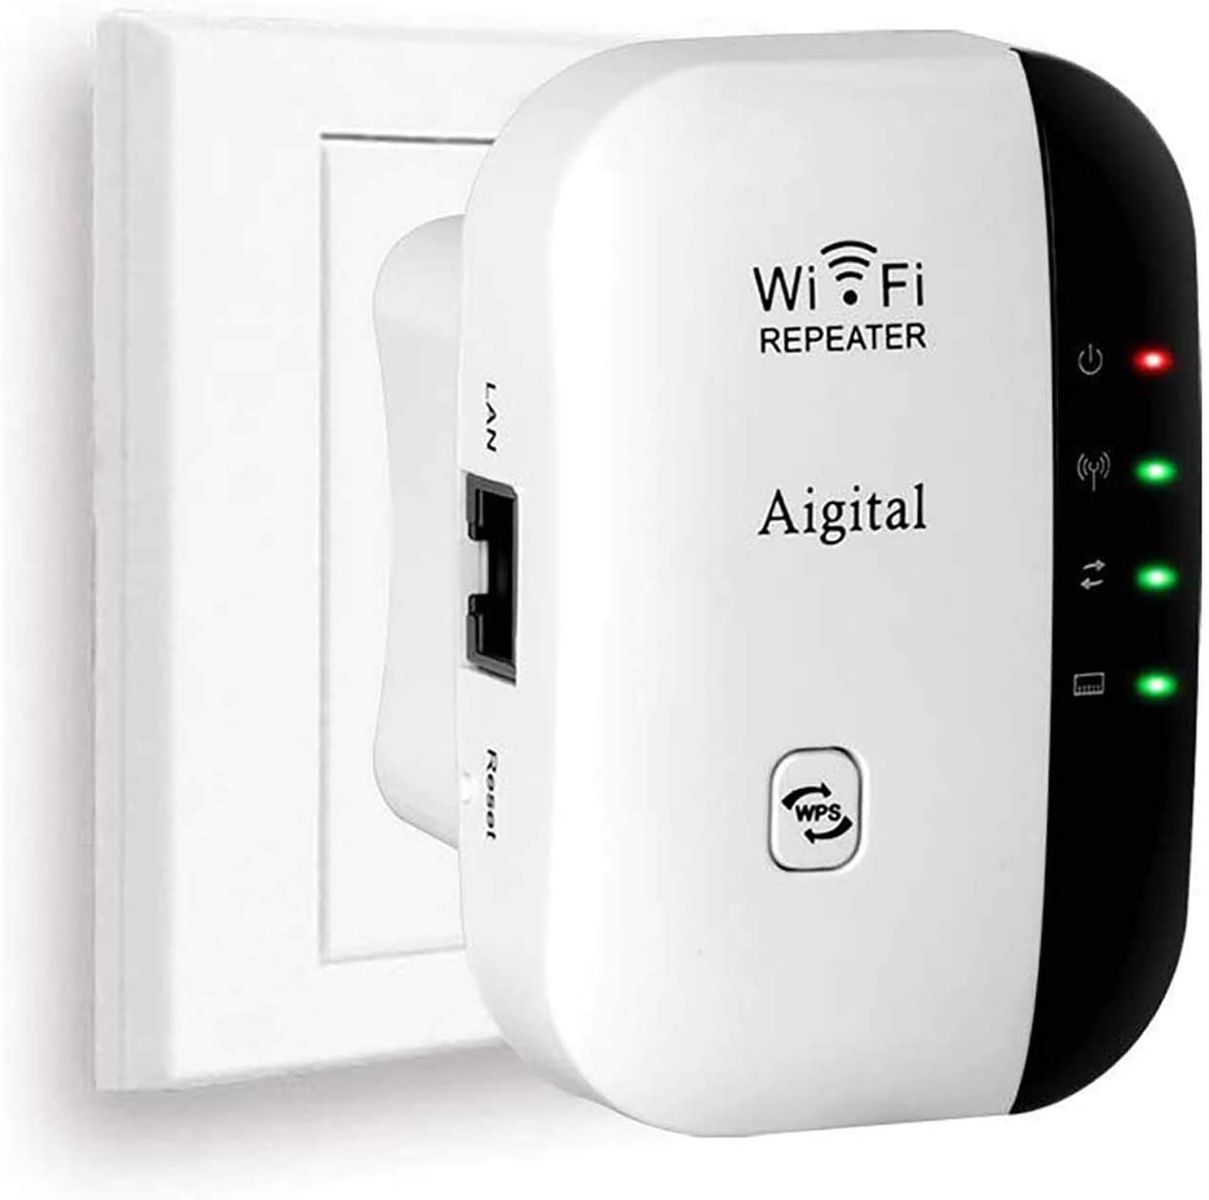 Aigital WLAN Booster WiFi Amplifier Range Extender 300Mbps Multifunction Mini Wi-Fi Signal Amplifier Wireless Access Point 2 4GHz with WPS Function Approved